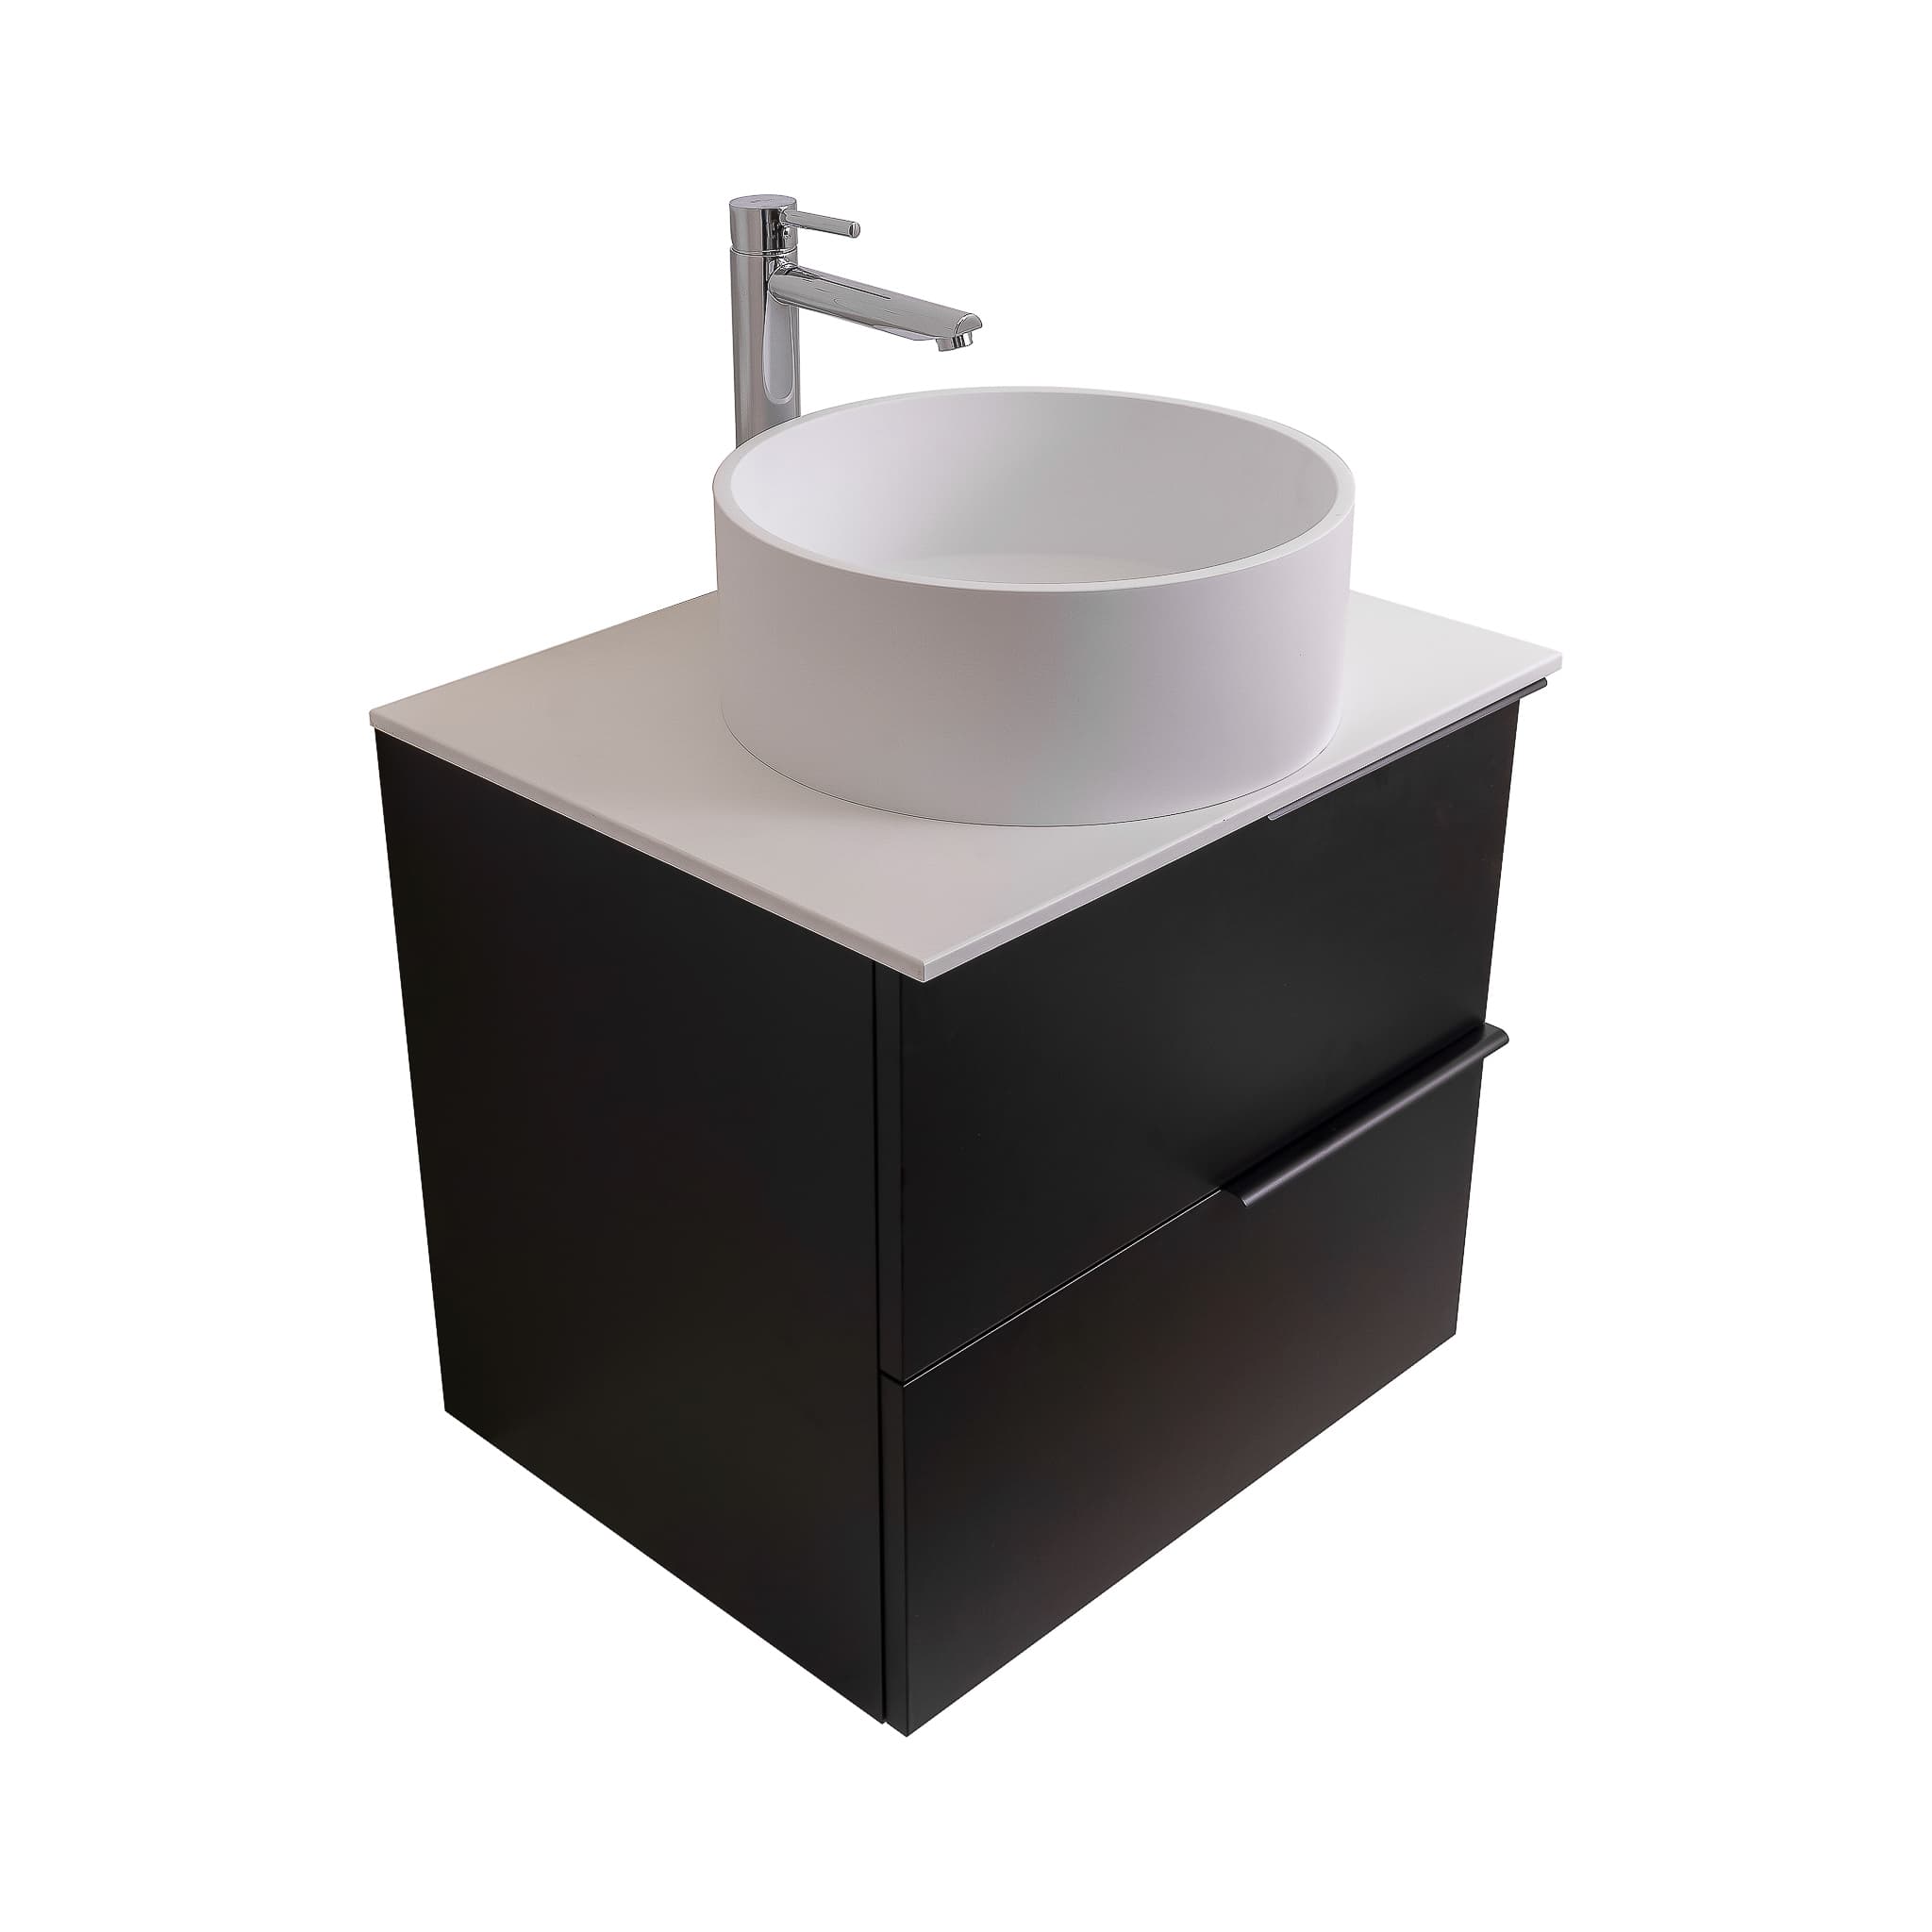 Mallorca 23.5 Matte Black Cabinet, Solid Surface Flat White Counter And Round Solid Surface White Basin 1386, Wall Mounted Modern Vanity Set